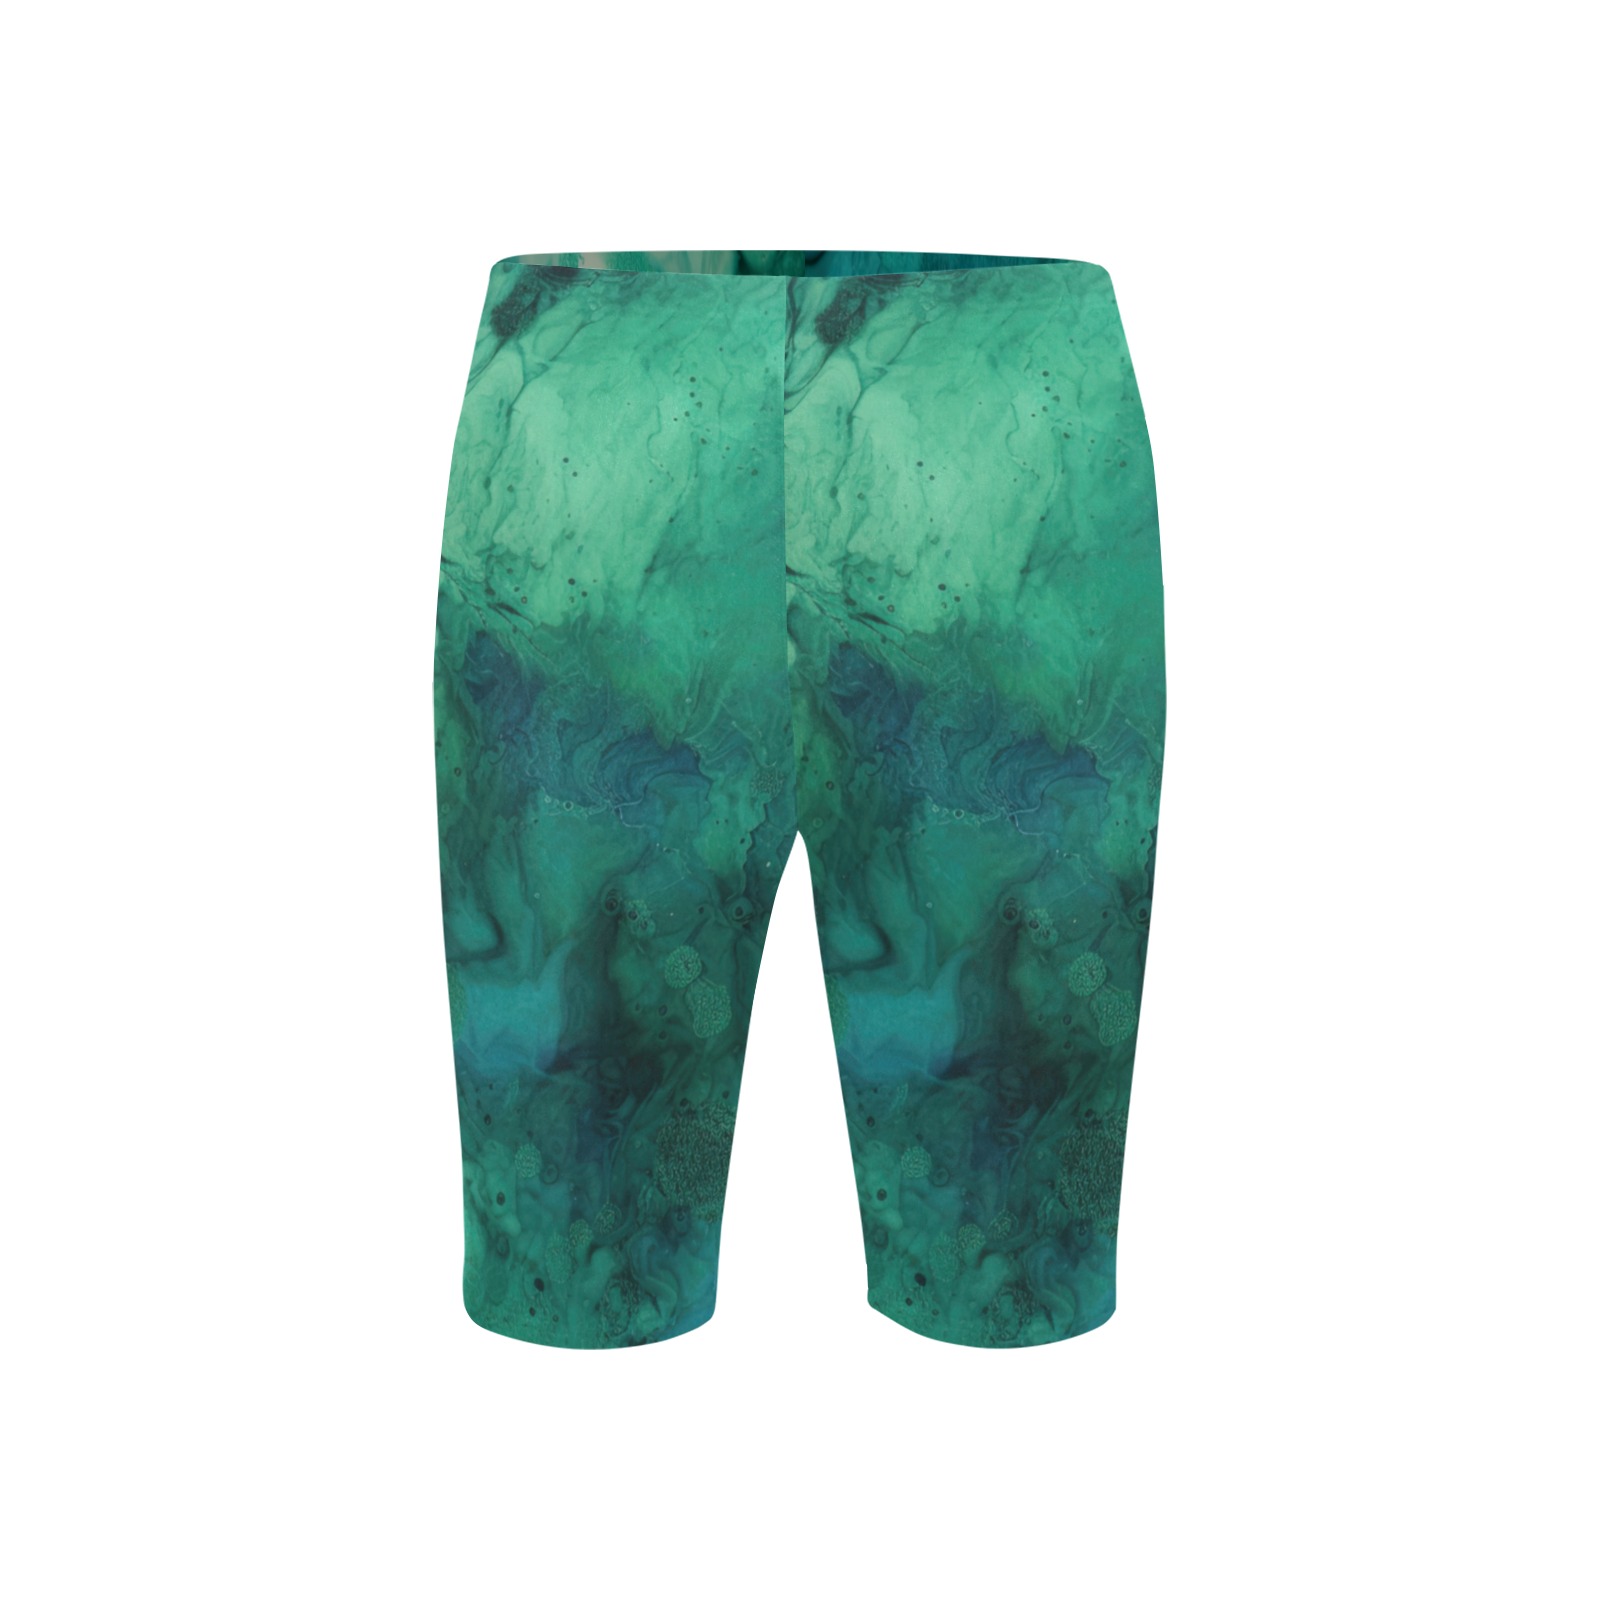 CG_a_green_and_blue_textured_surface_in_the_style_of_fluid_ink__8ea3f316-602e-4f64-bcf8-c283f84ca5b3 Men's Knee Length Swimming Trunks (Model L58)